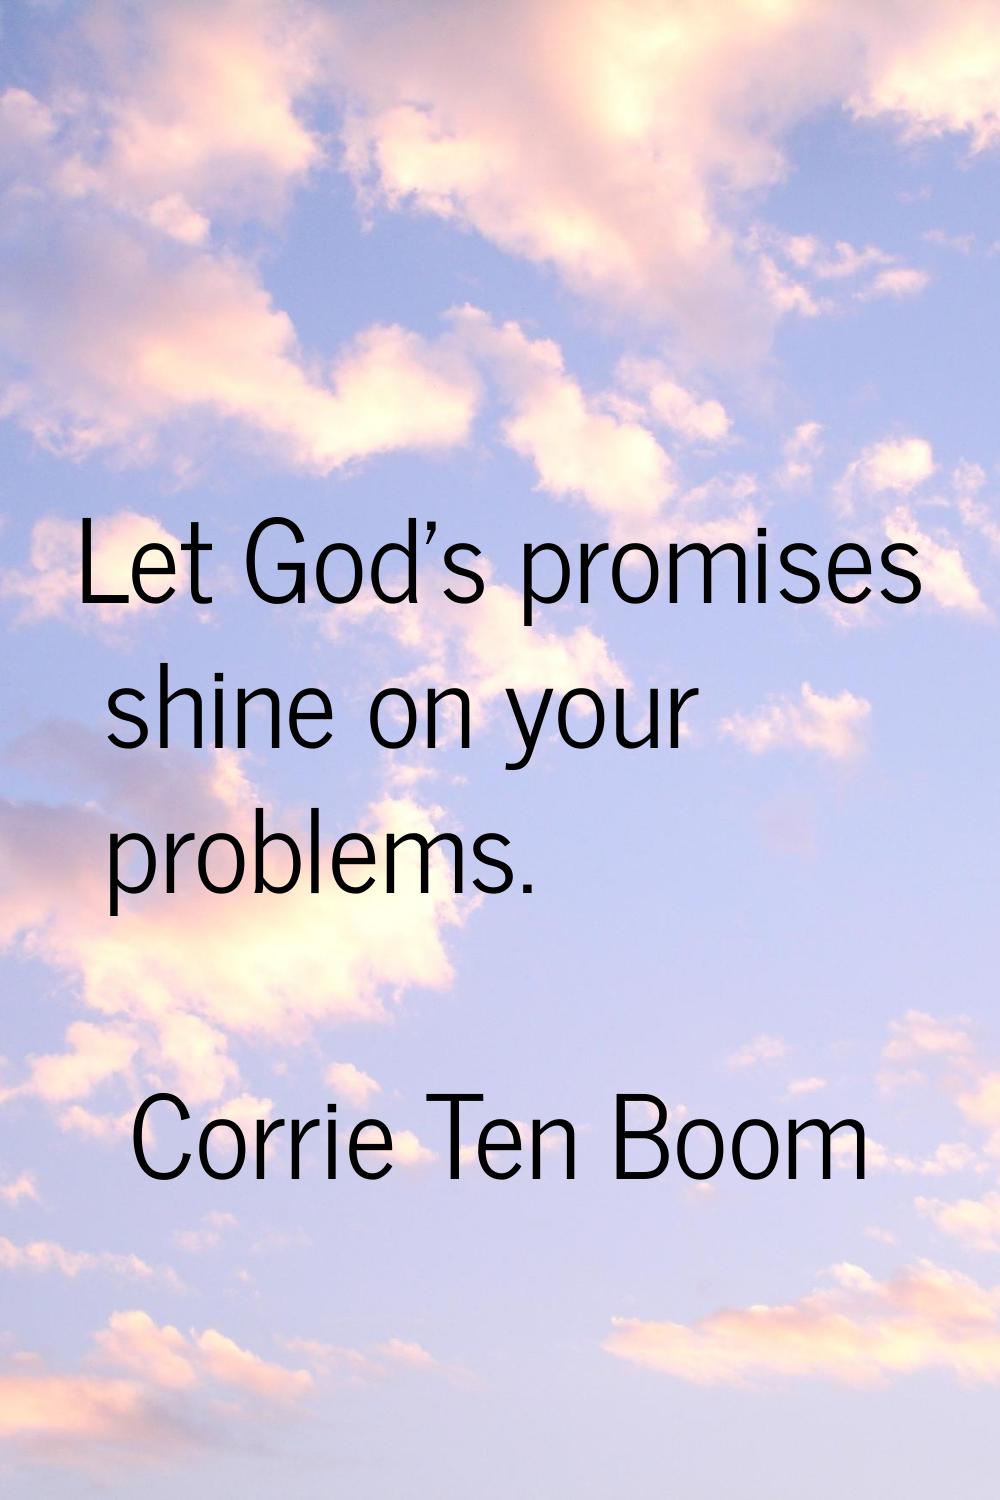 Let God's promises shine on your problems.